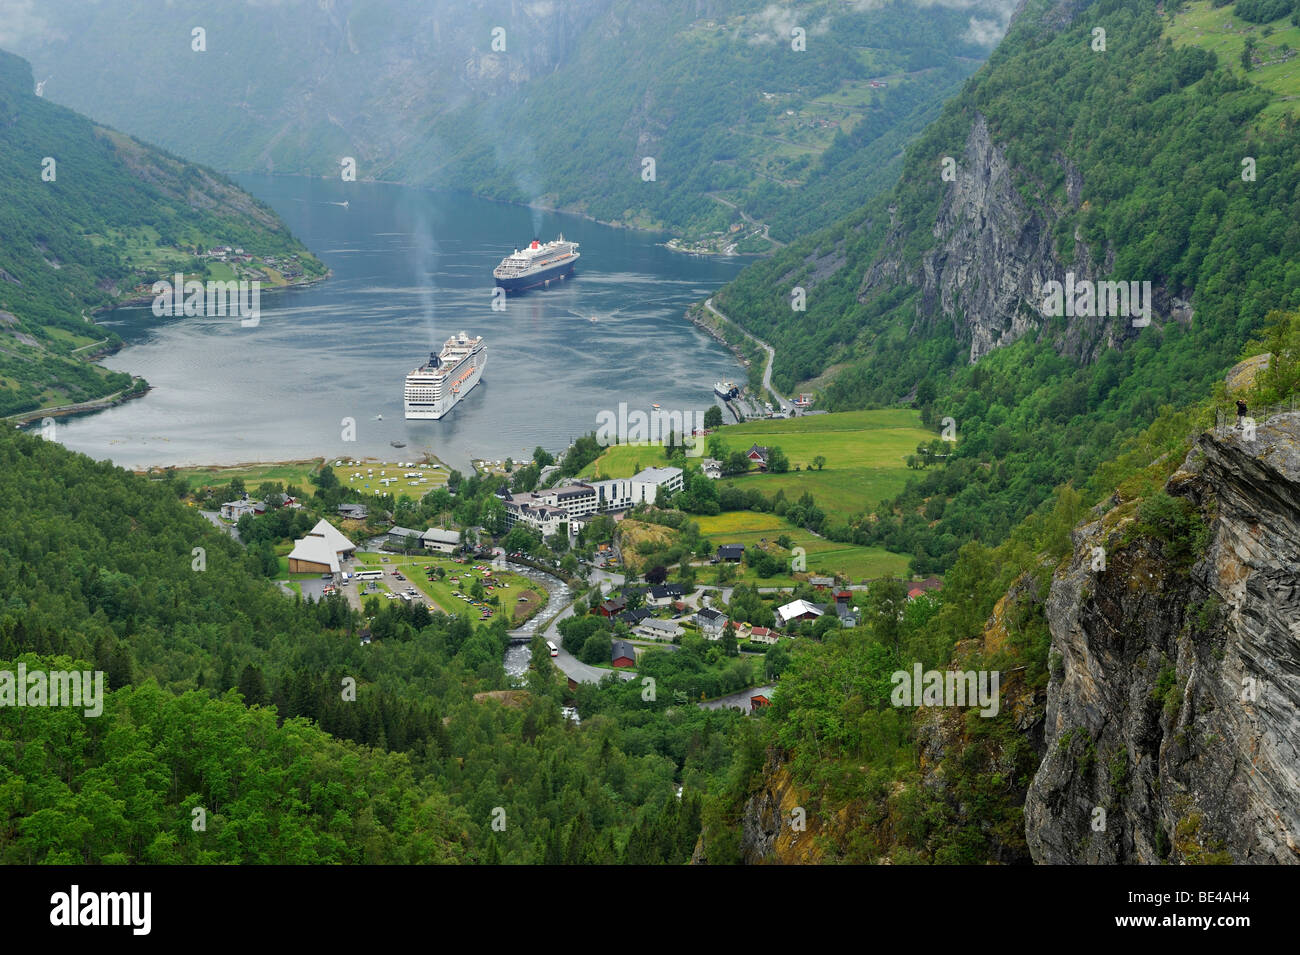 View of the village of Geiranger with cruise ships on the Geirangerfjord, Norway, Scandinavia, Europe Stock Photo